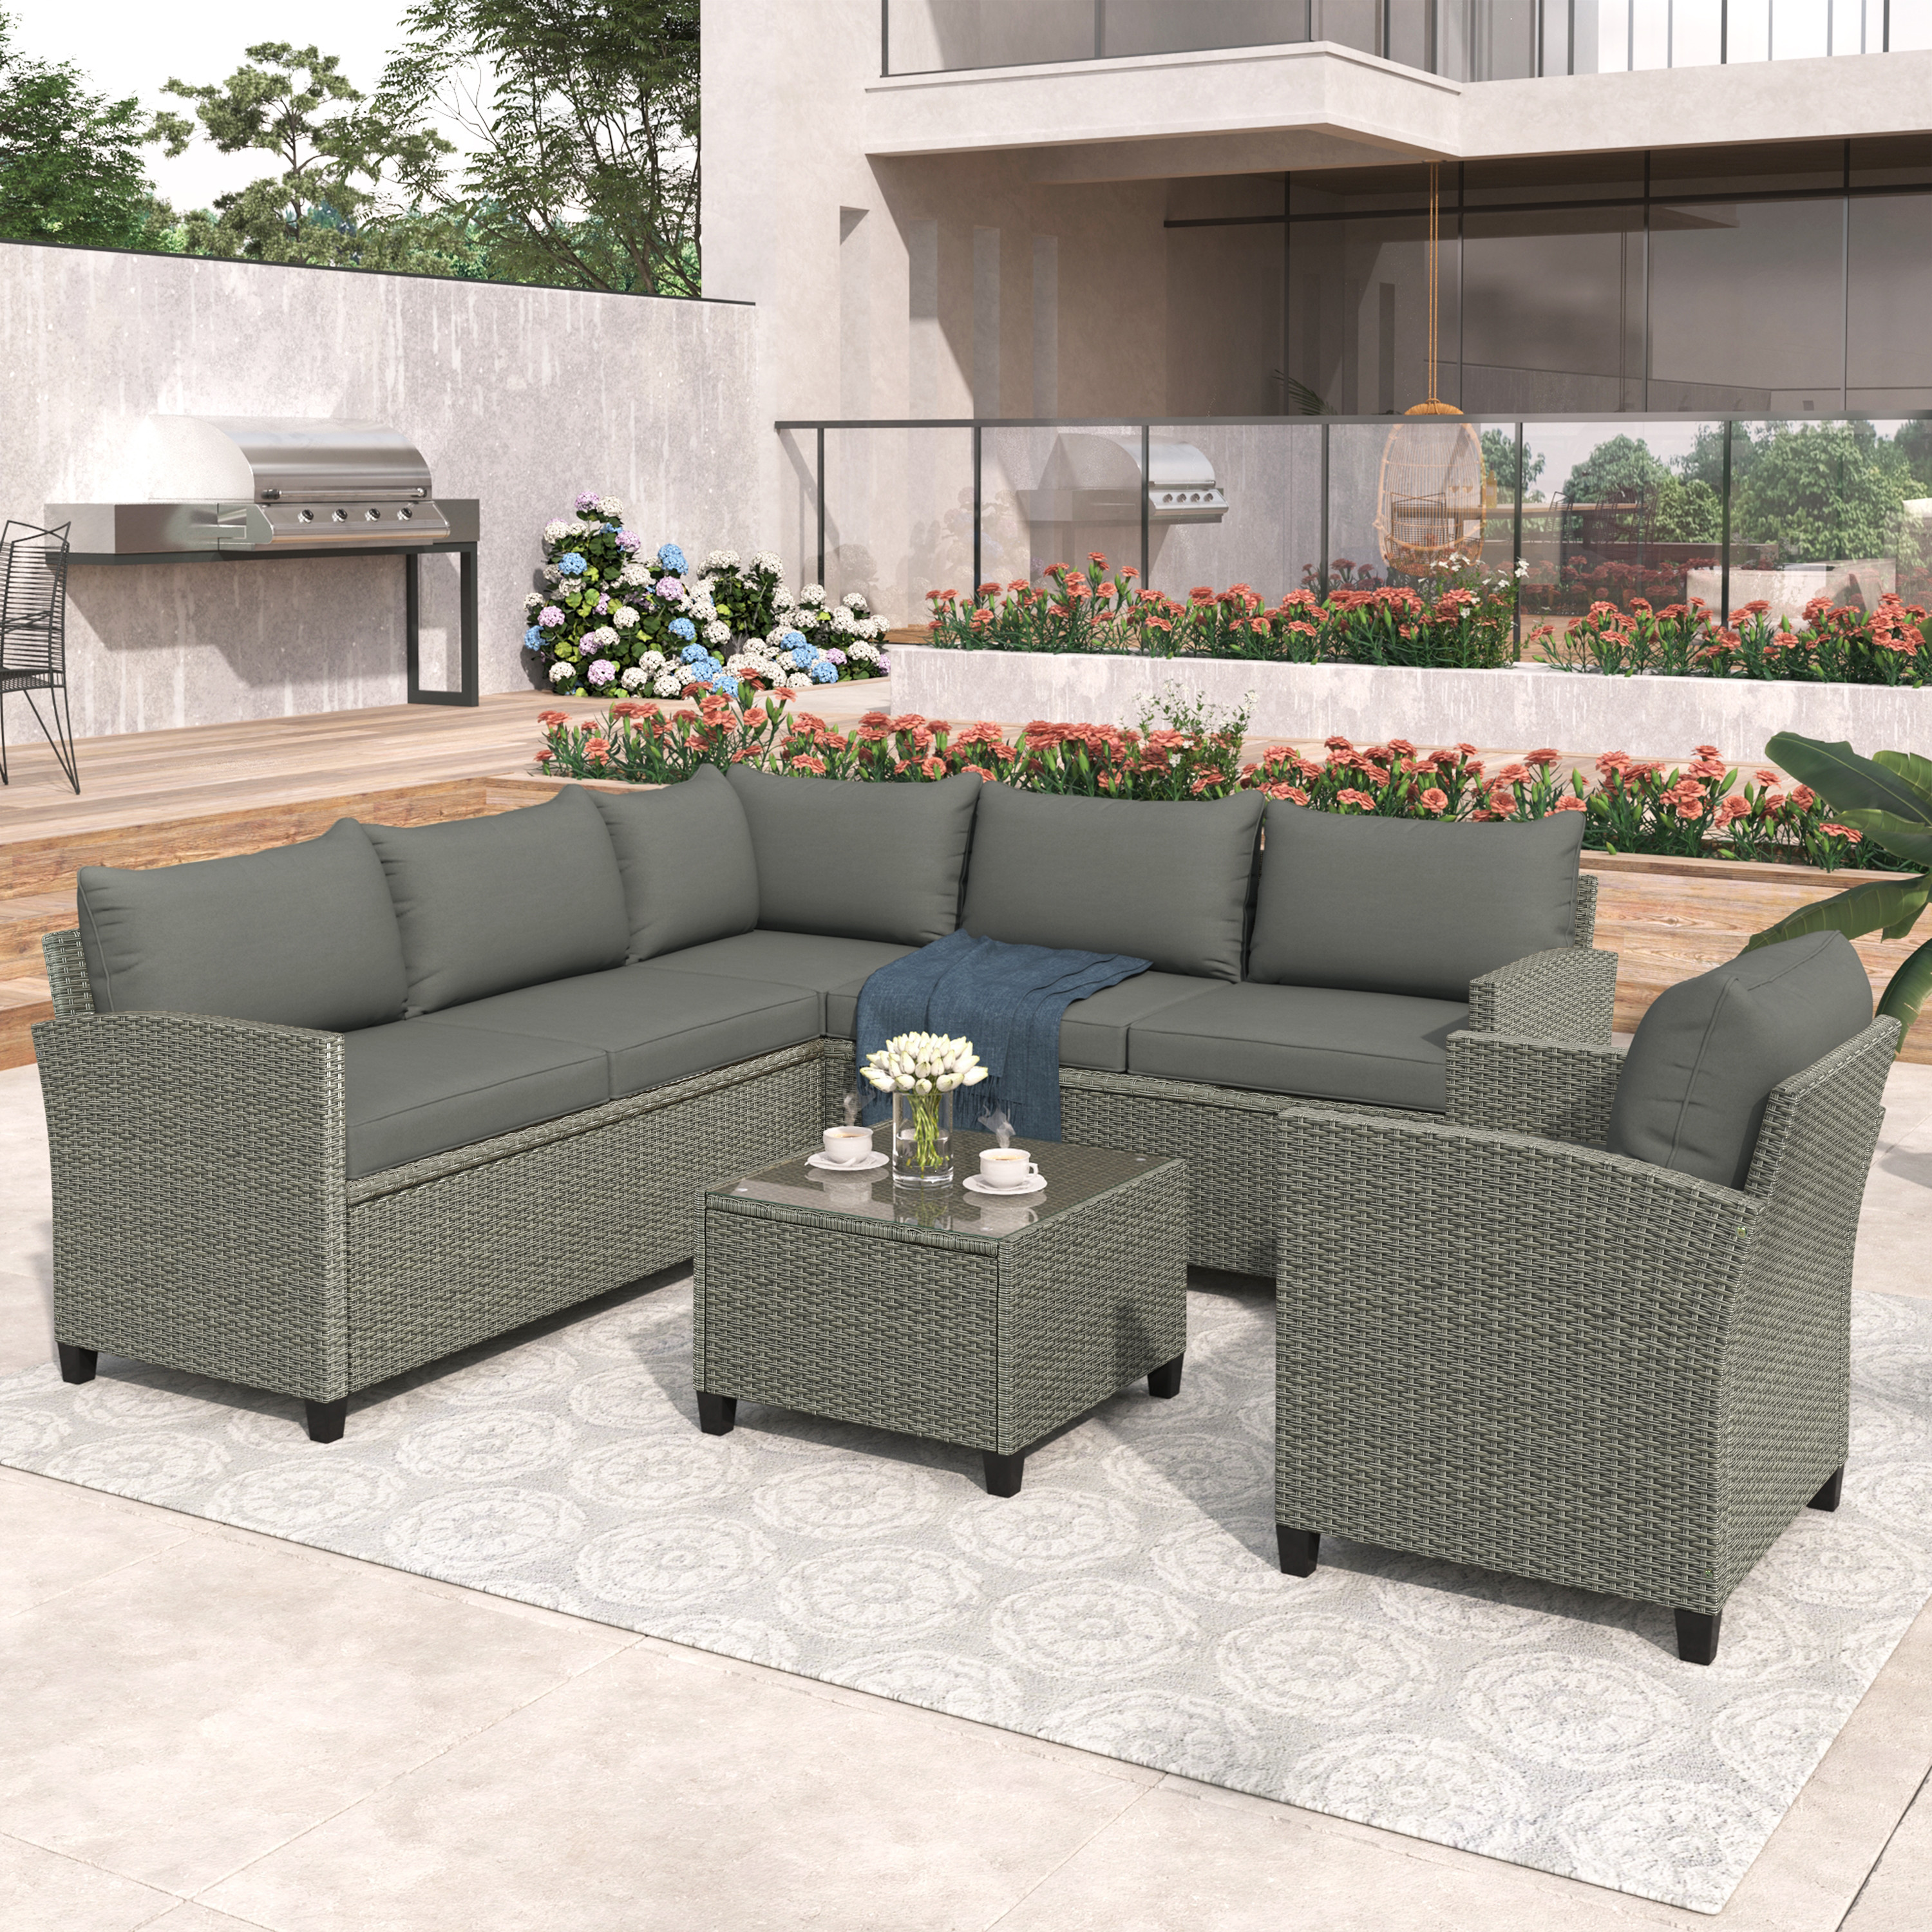 Garden Patio Conversation Set, BTMWAY 5 Piece Outdoor Sectional Sofa Couch Patio Furniture Sets with Glass Table, Cushions and Single Chair, PE Wicker Patio Sofa Sets for Garden Backyard Poolside Lawn - image 1 of 9